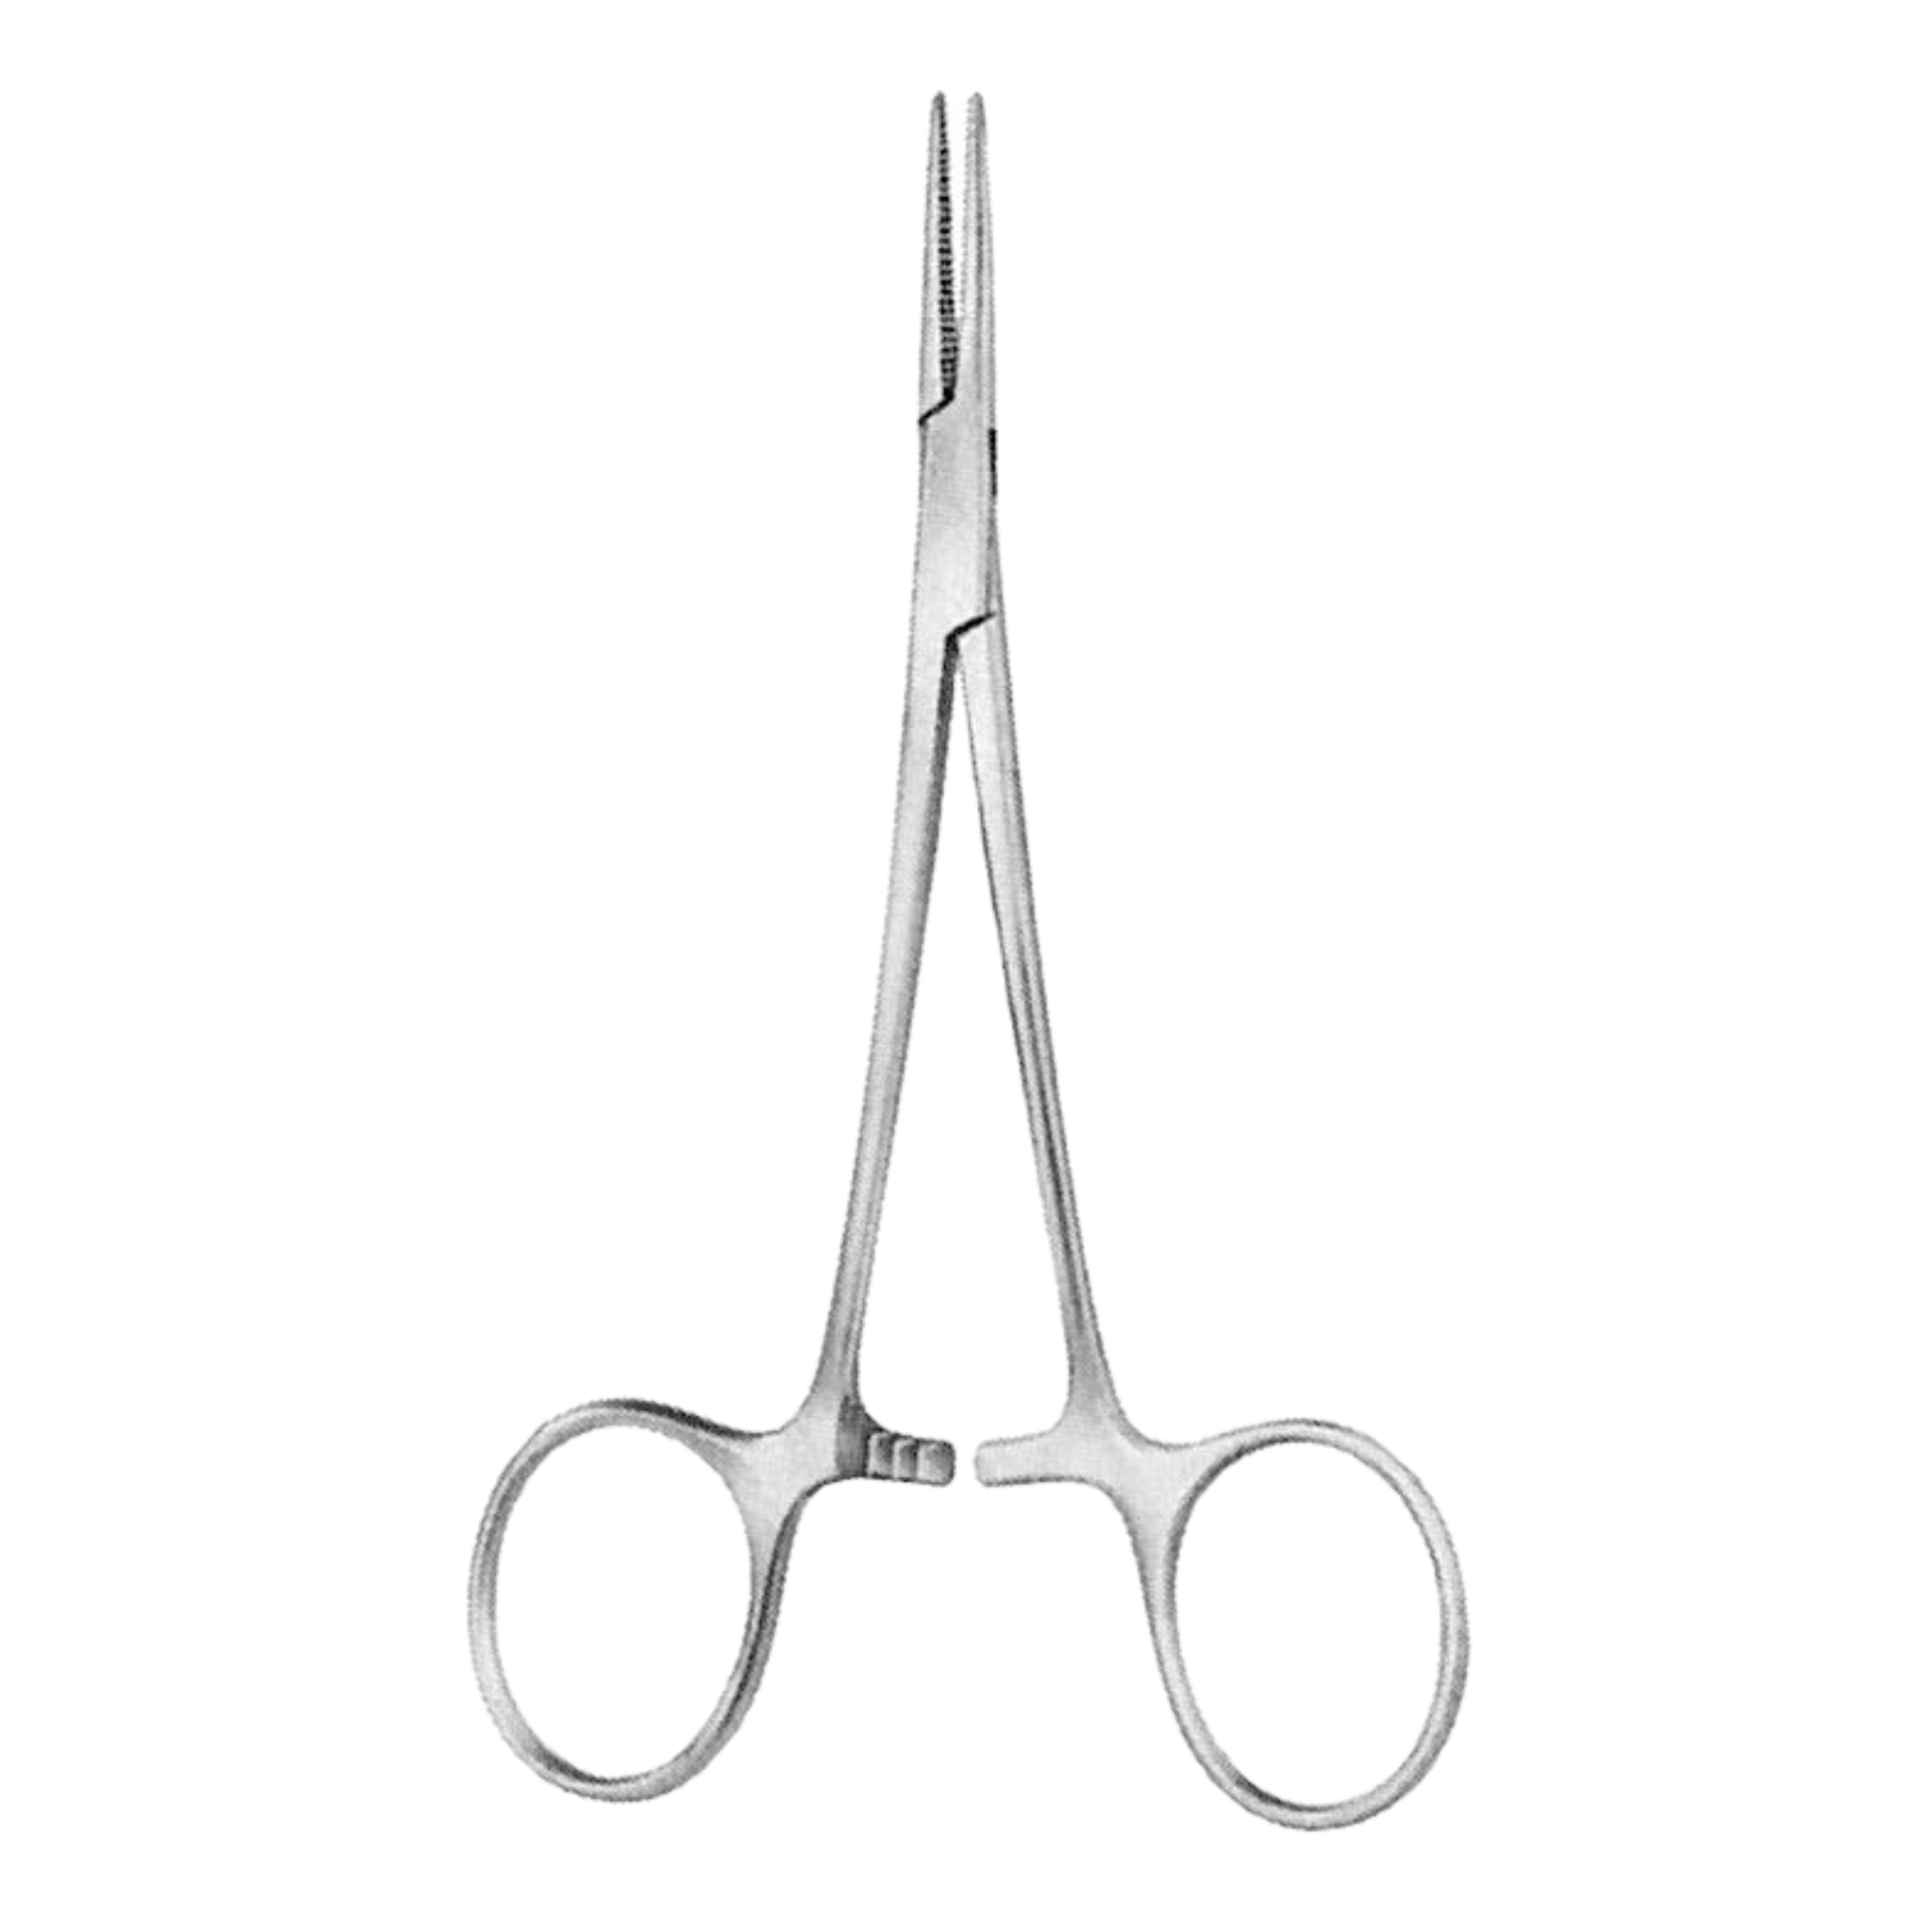 Halsted Mosquito Forceps- Straight, 12.5 cm